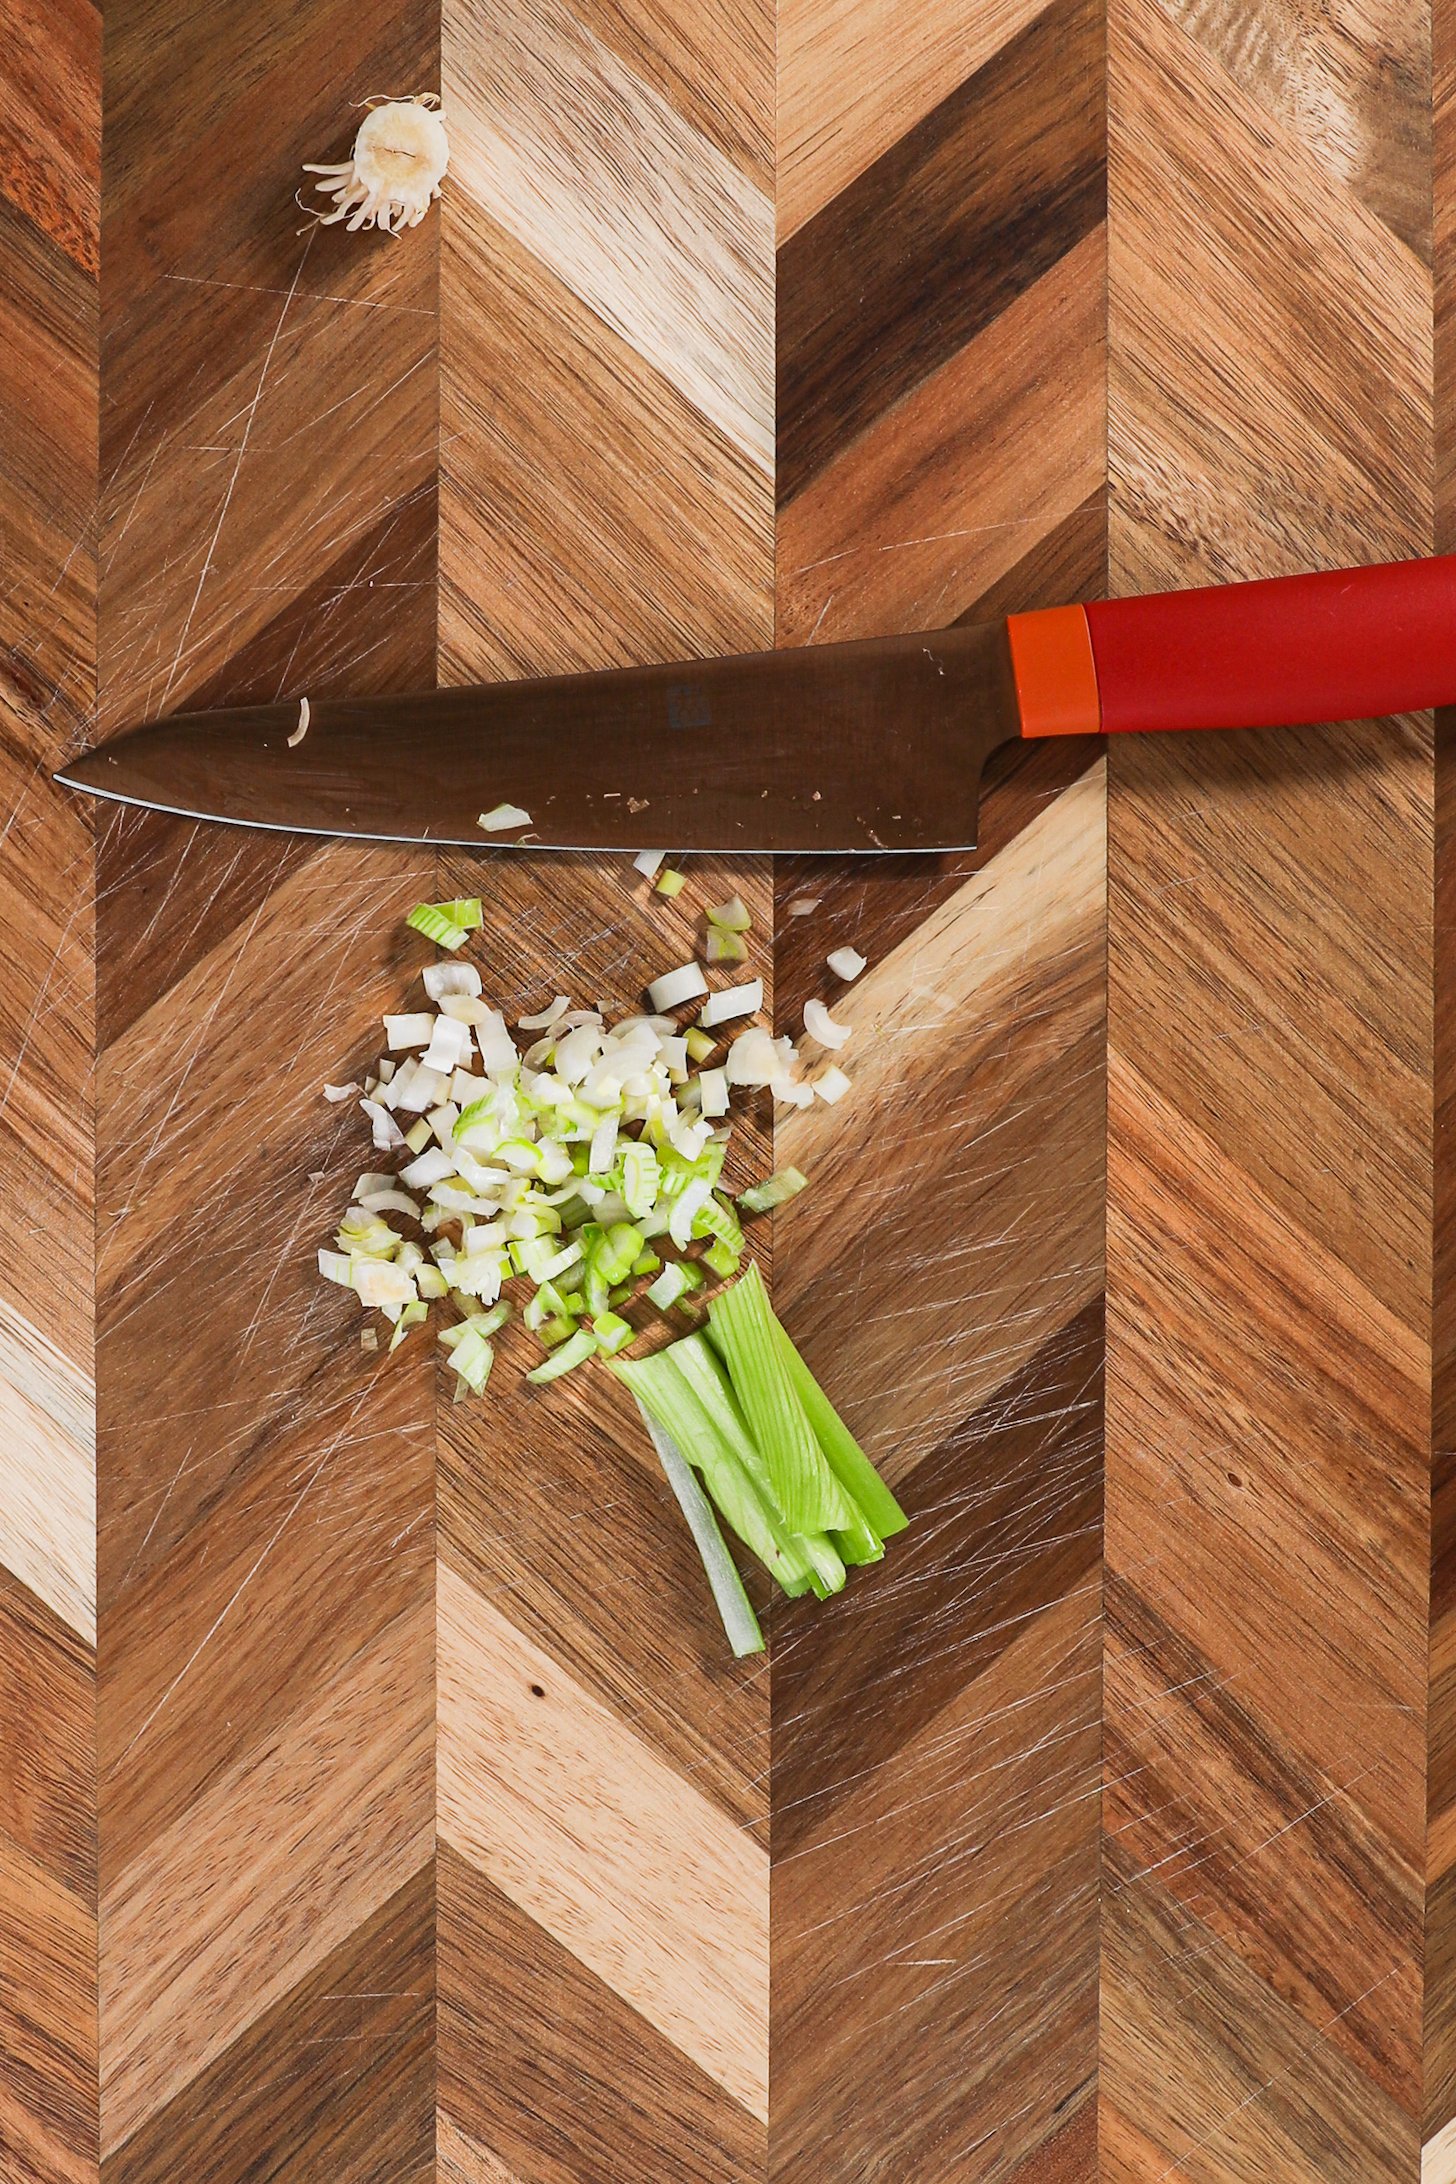 Strips of spring onion chopped finely with a red knife on a checkered wooden board.